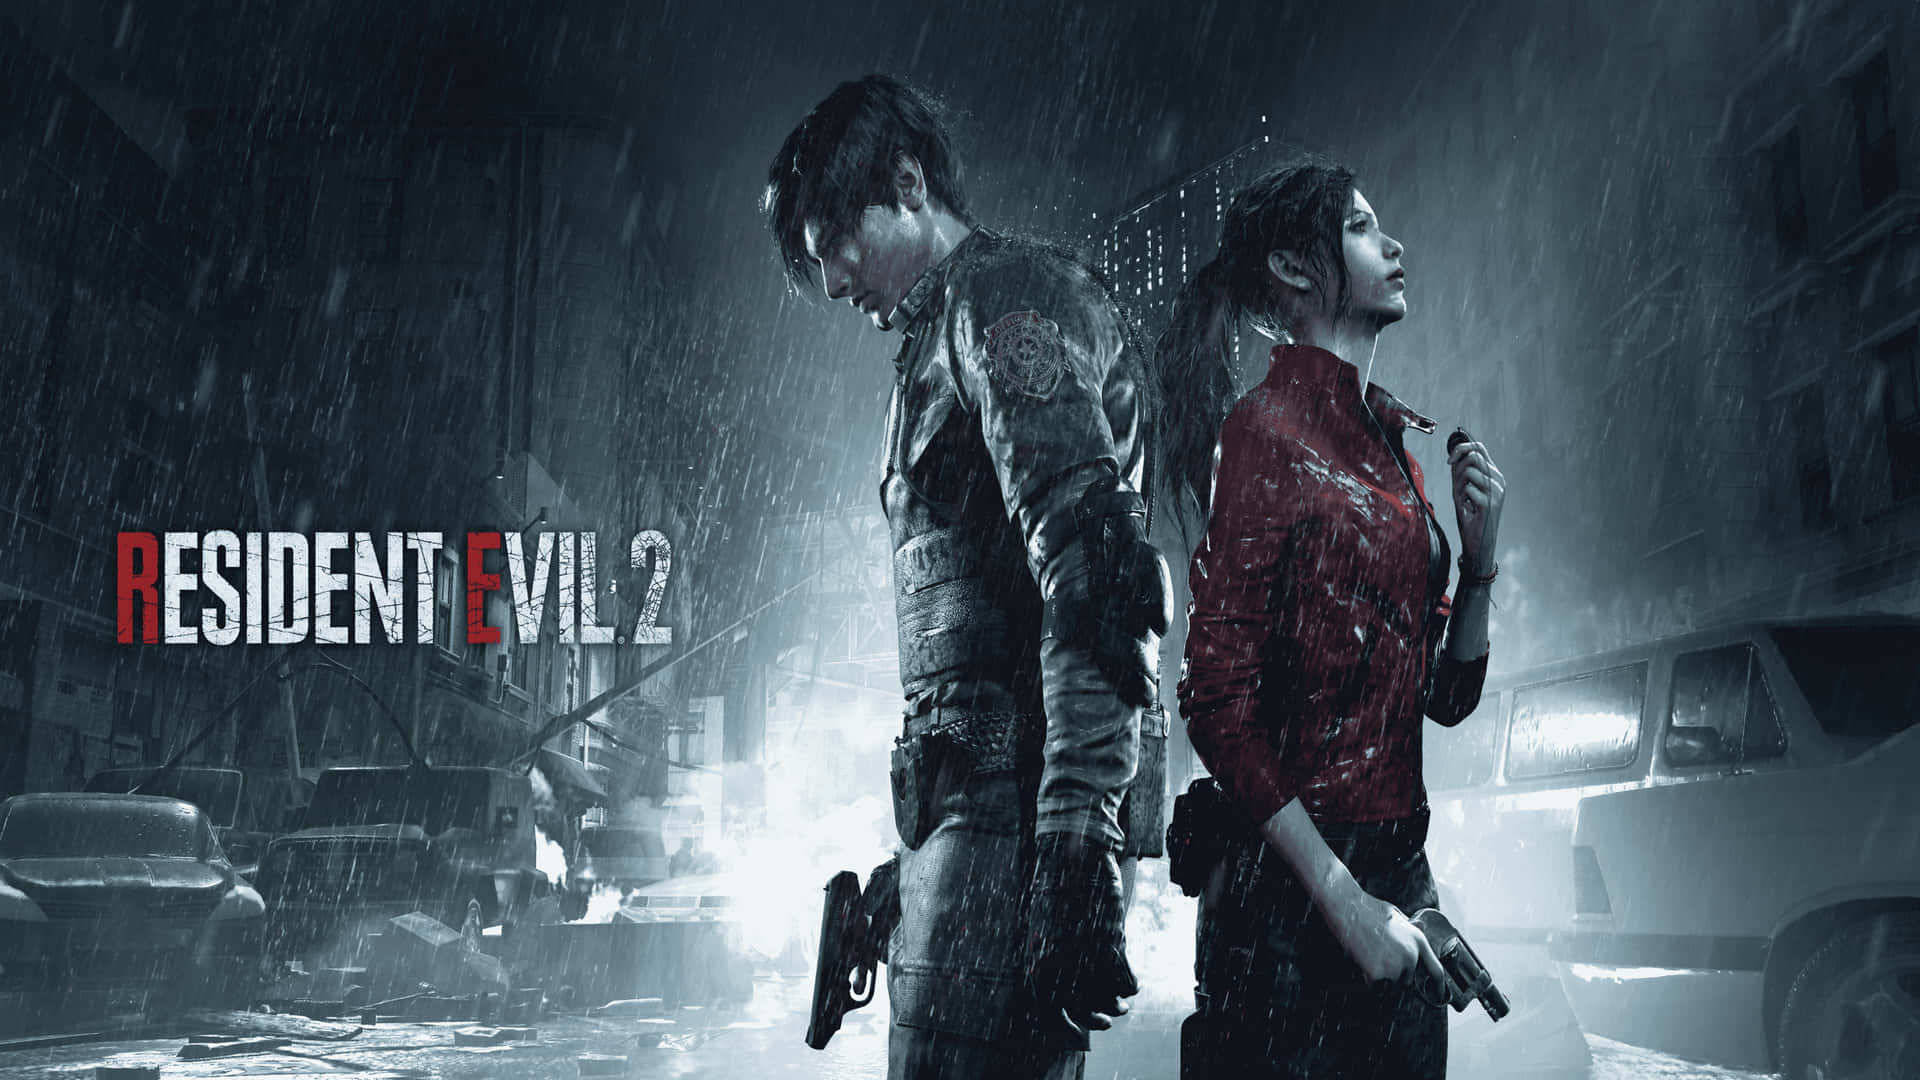 Claire Redfield, fearless survivor of the Raccoon City Incident Wallpaper